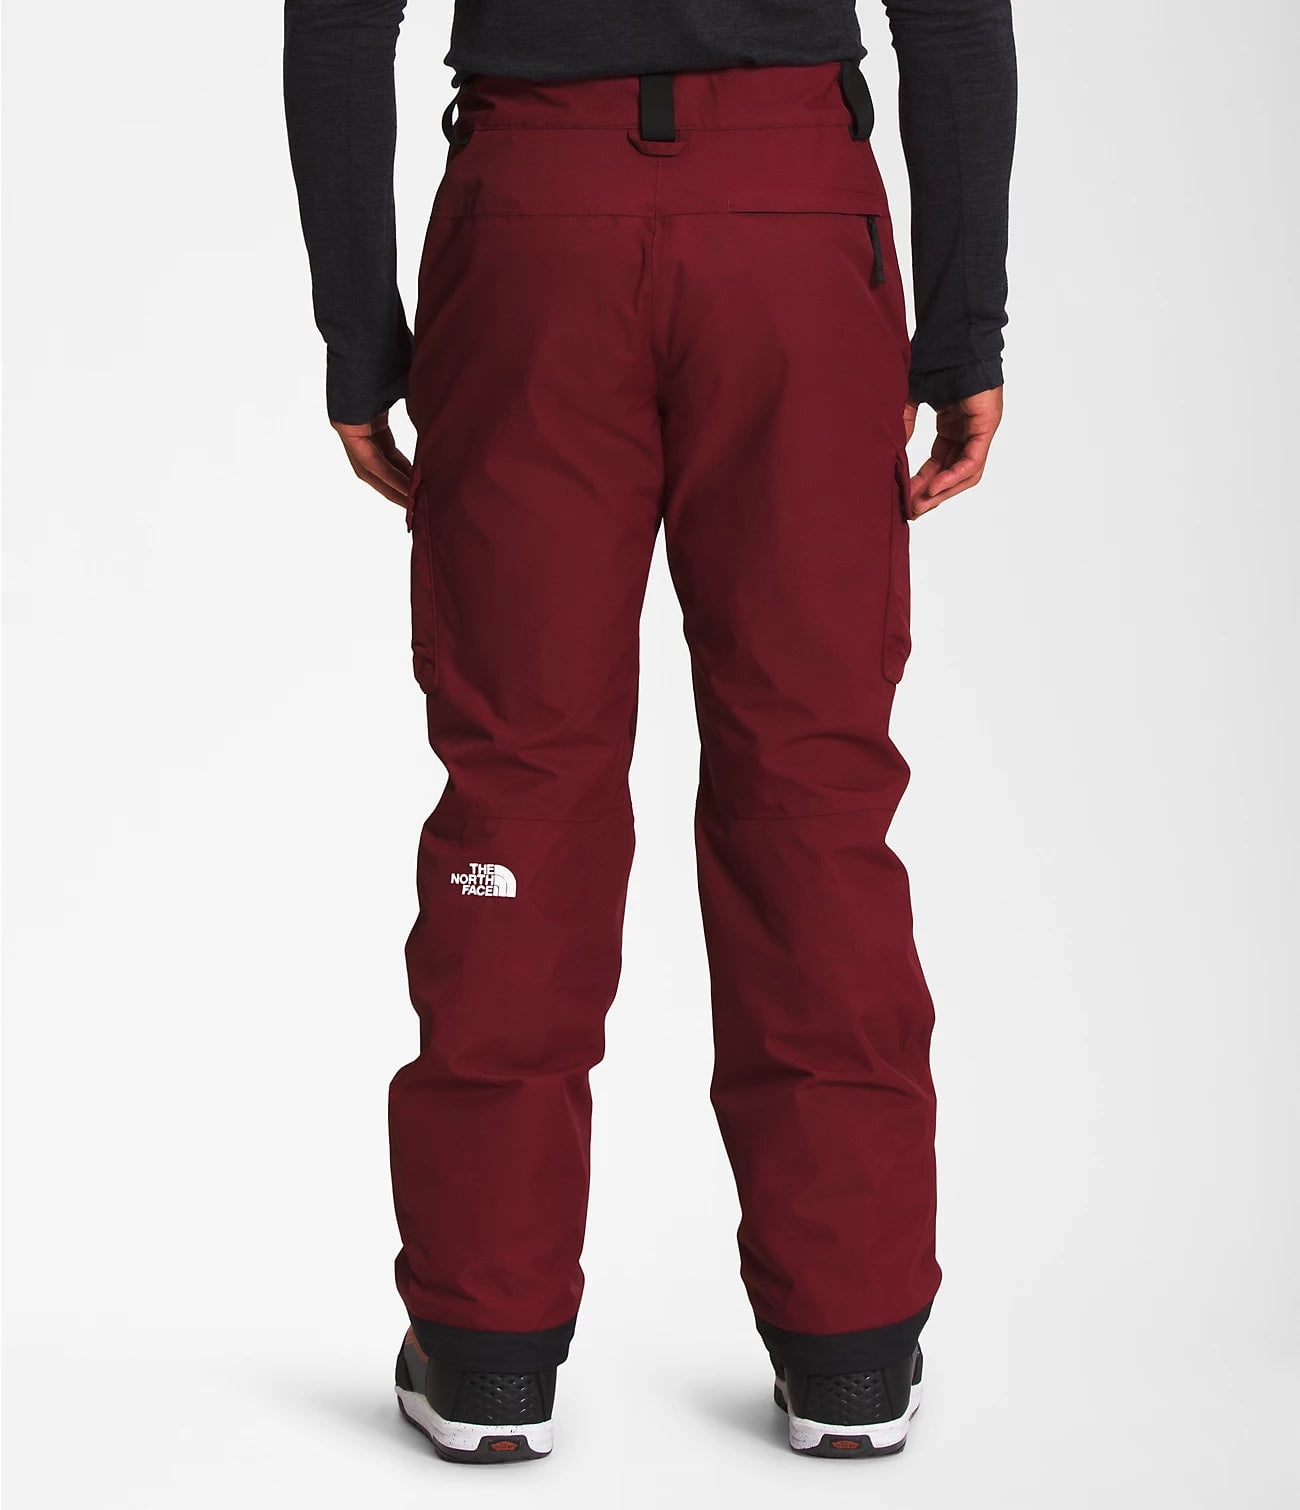 UNDERCOVER Navy The North Face Edition Geodesic Cargo Pants Undercover